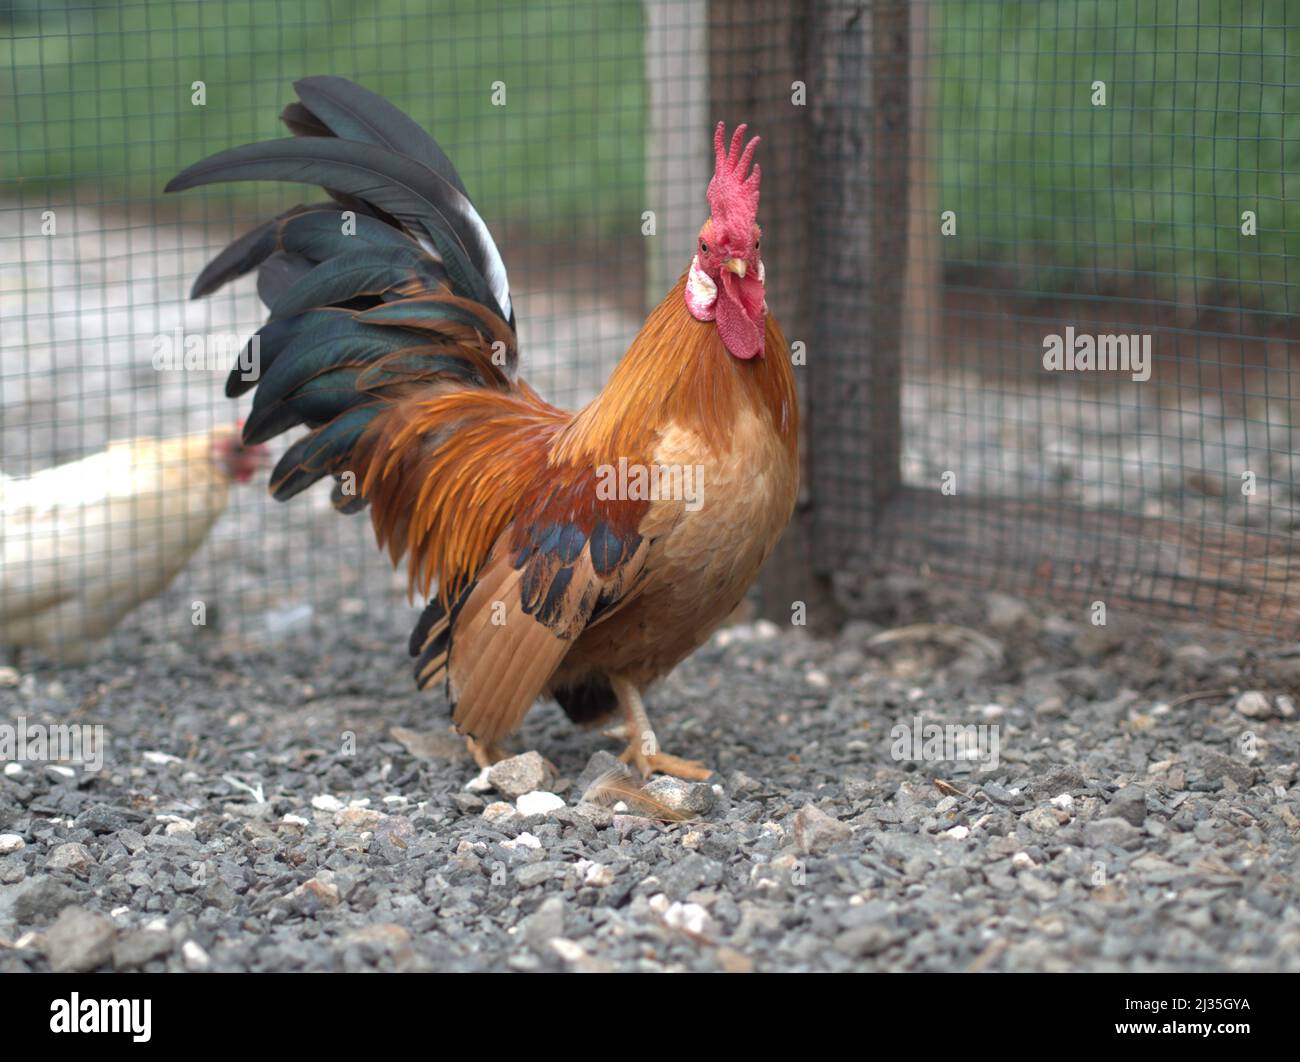 Bantam Rooster Chicken Beautiful Close Up with Natural Farm Background Stock Photo